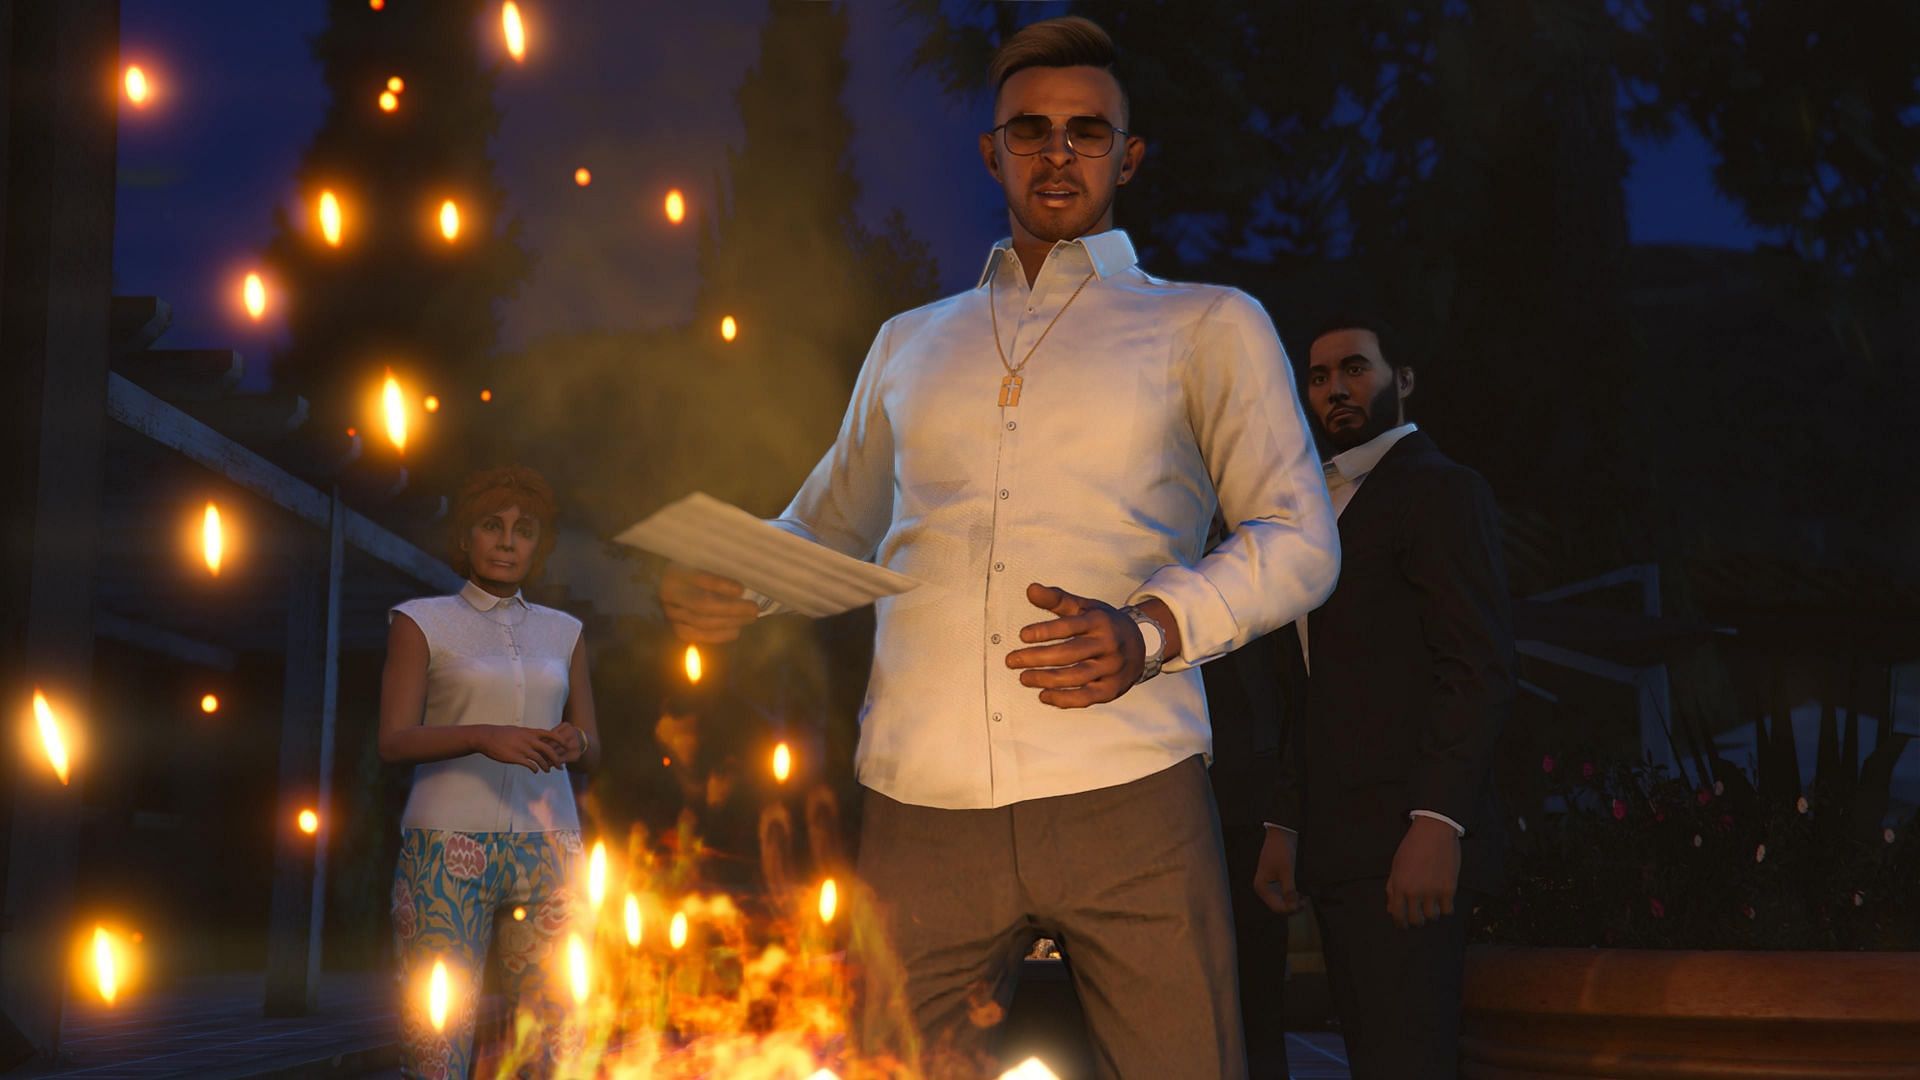 This GTA Online guide should help you see this cutscene for the first time